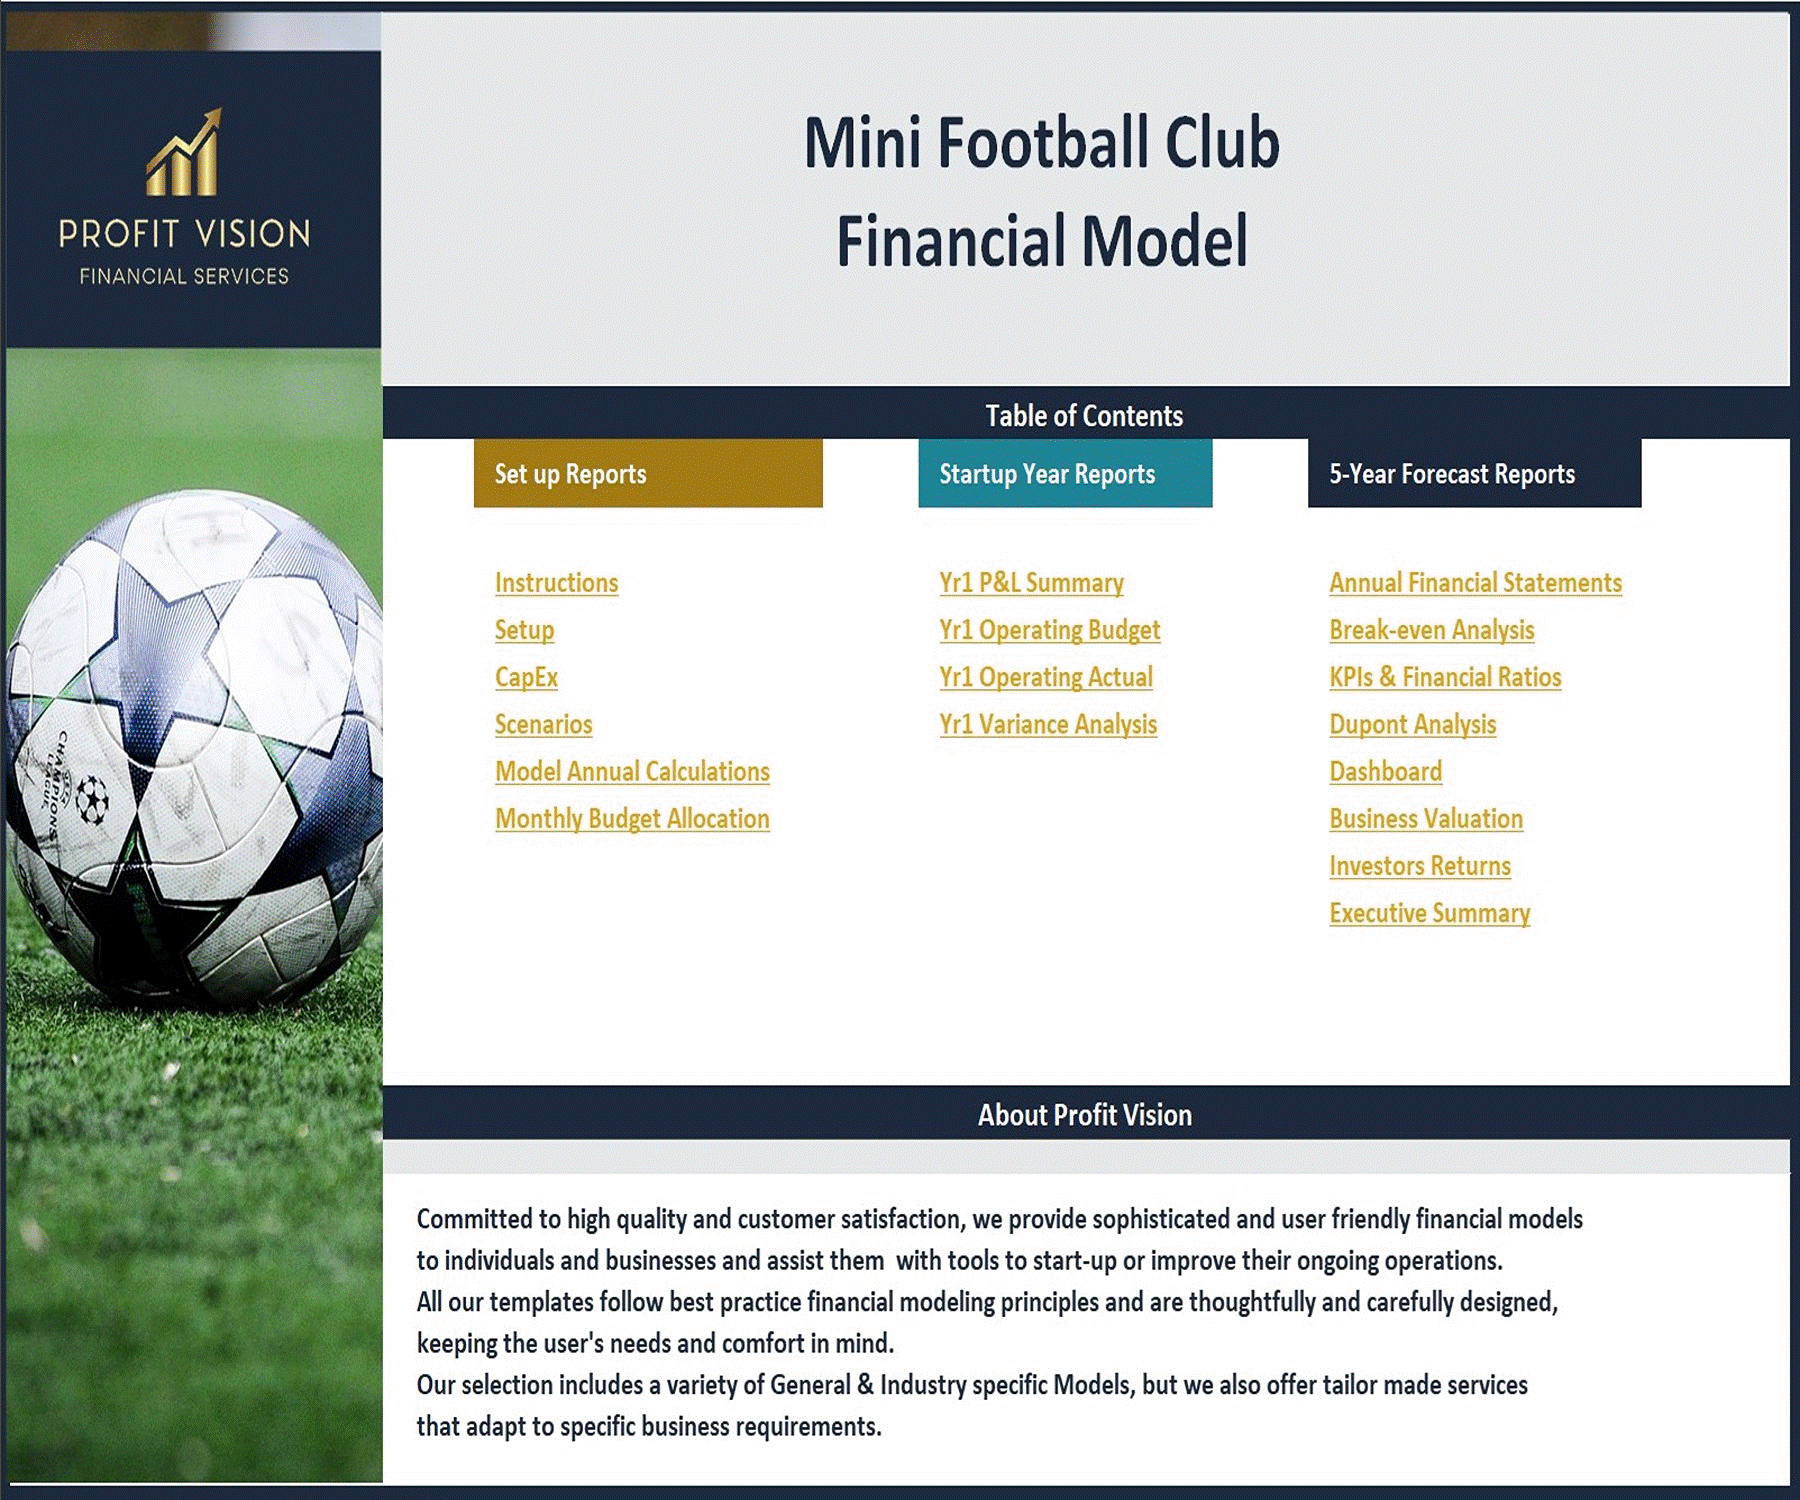 Mini Football Club Financial Model – 5 Year Forecast (Excel template (XLSX)) Preview Image